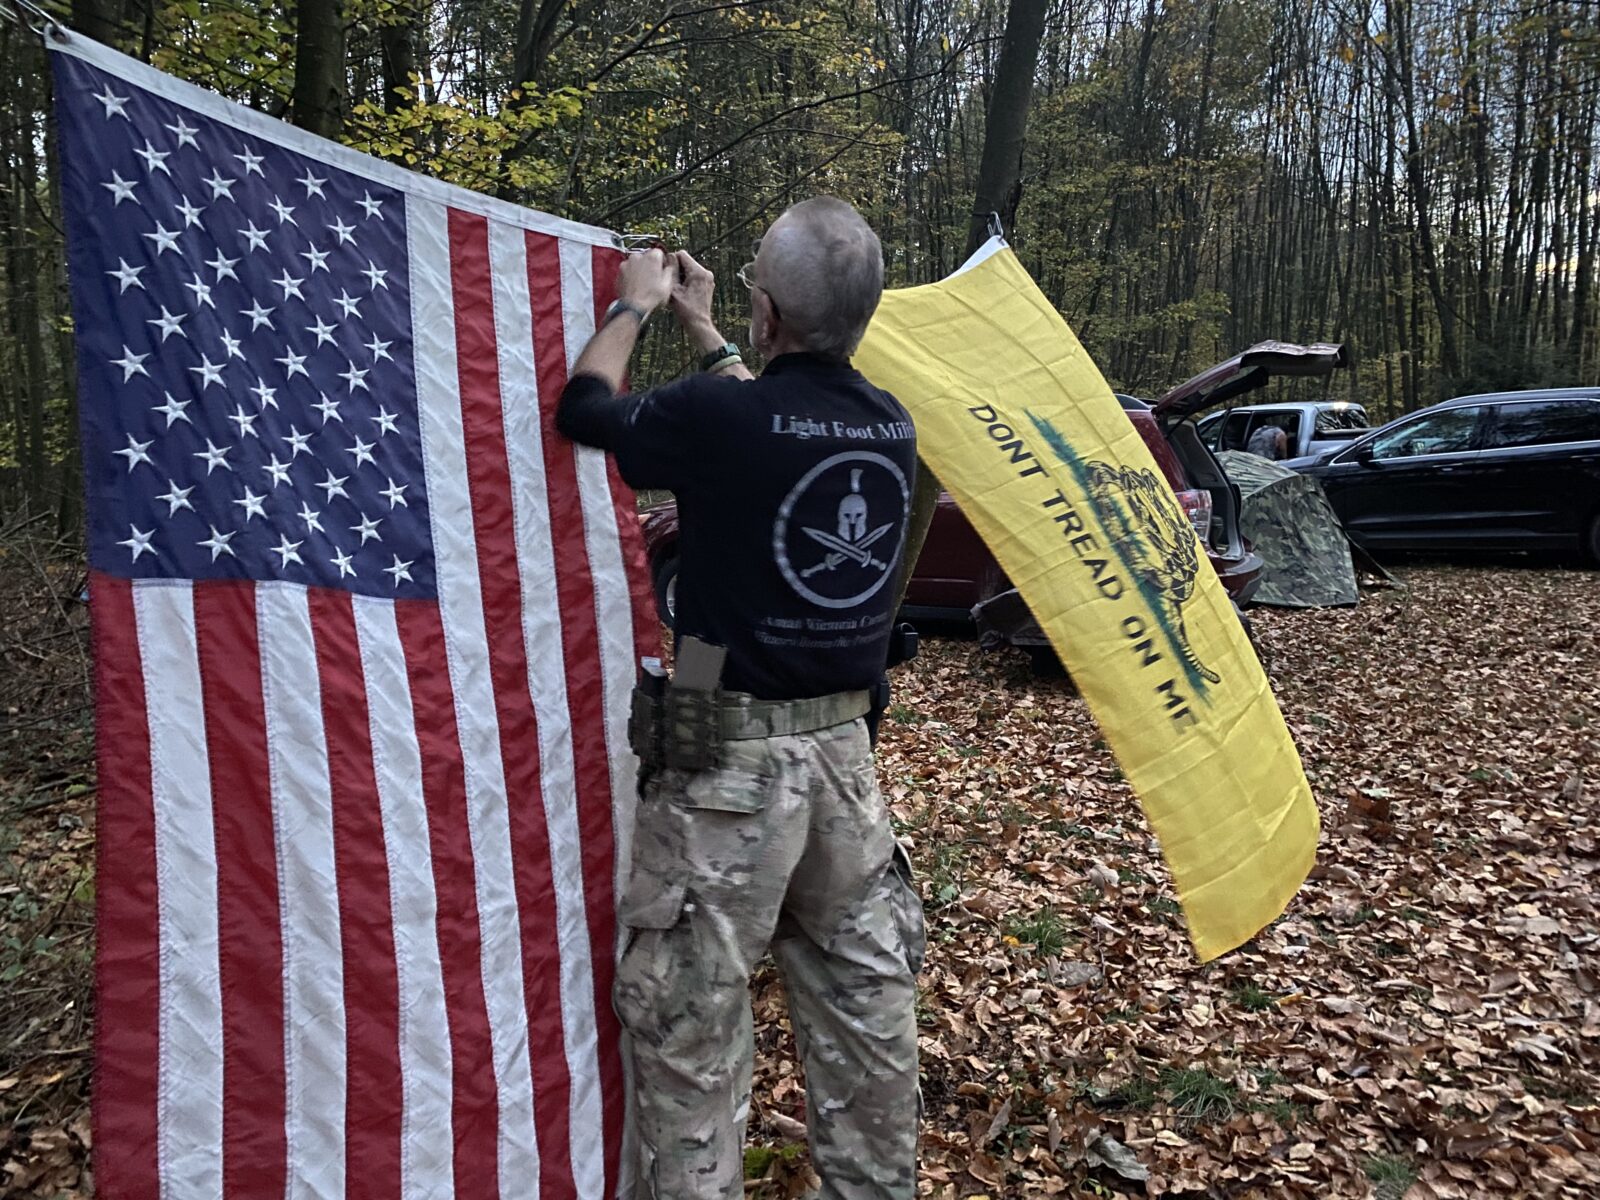 Bob Gardner hangs up the Gadsden flag next to the American flag at a training camp for the Pennsylvania Volunteer Militia. The Gadsden Flag has become a symbol of militias and other far-right groups. As Gardner put it, it represents “Don’t fuck with me.”